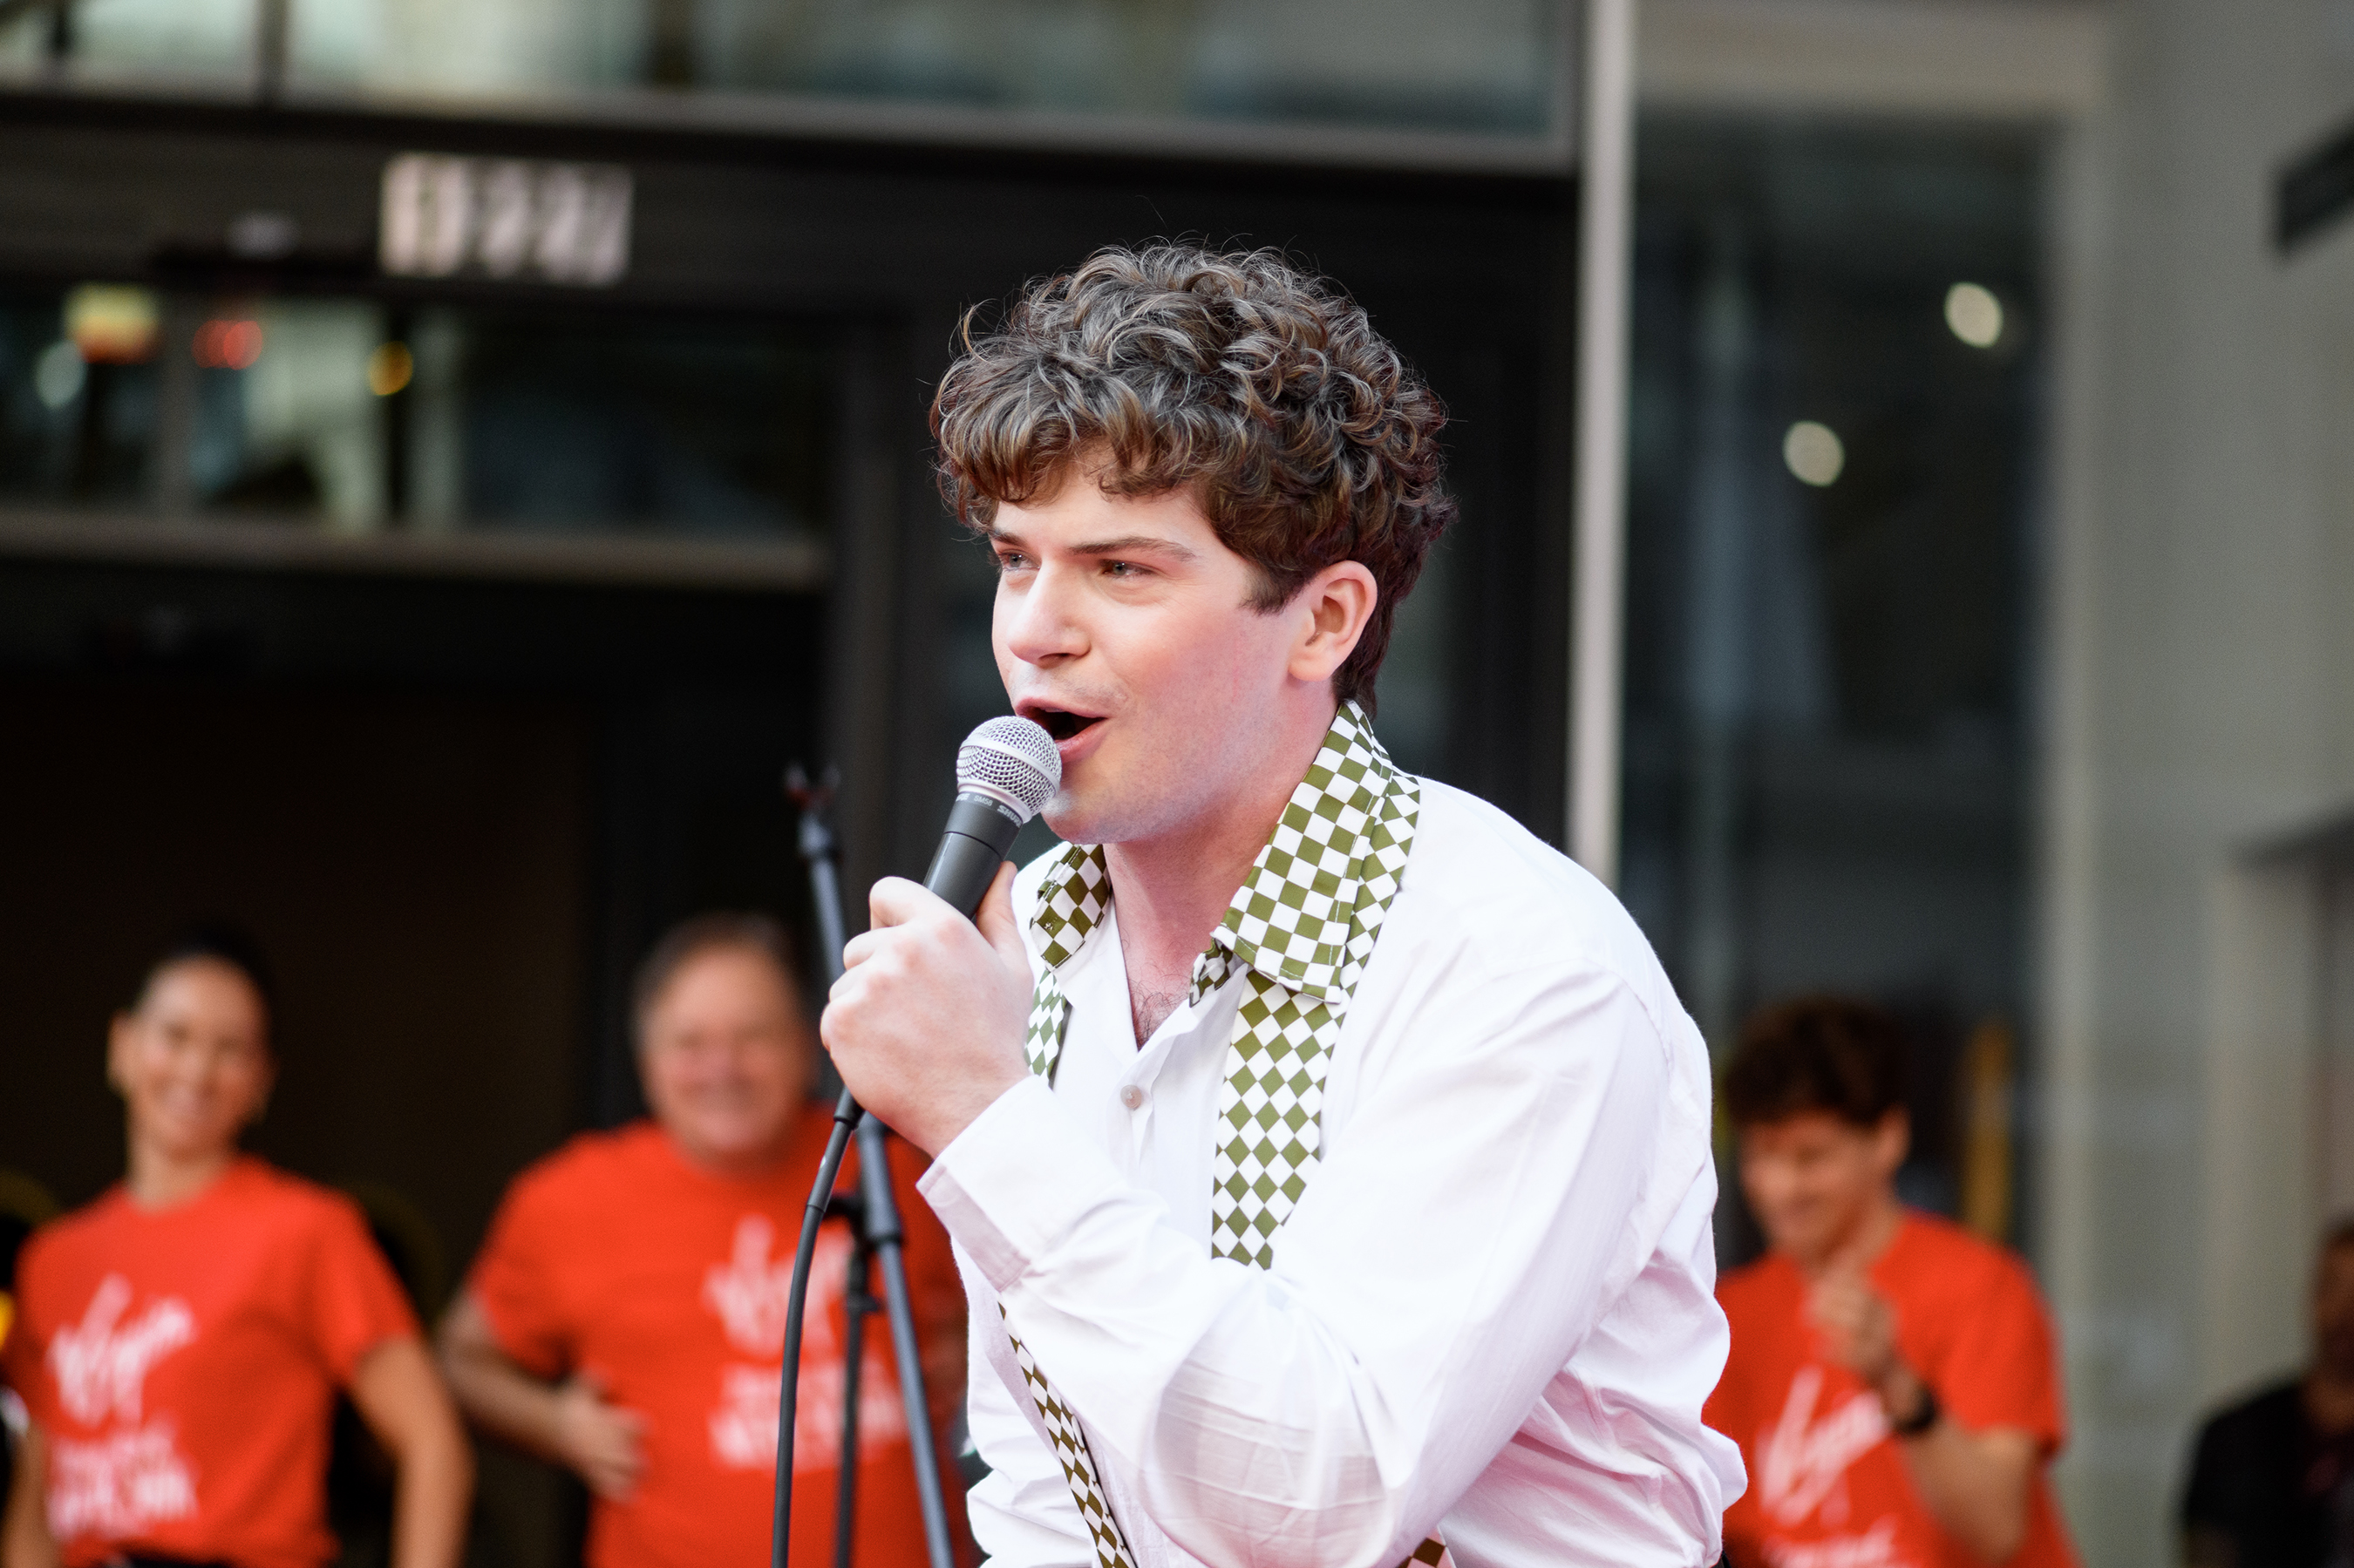 Broadway Star Colton Ryan performs New York, New York to celebrate opening of Virgin Hotels New York City